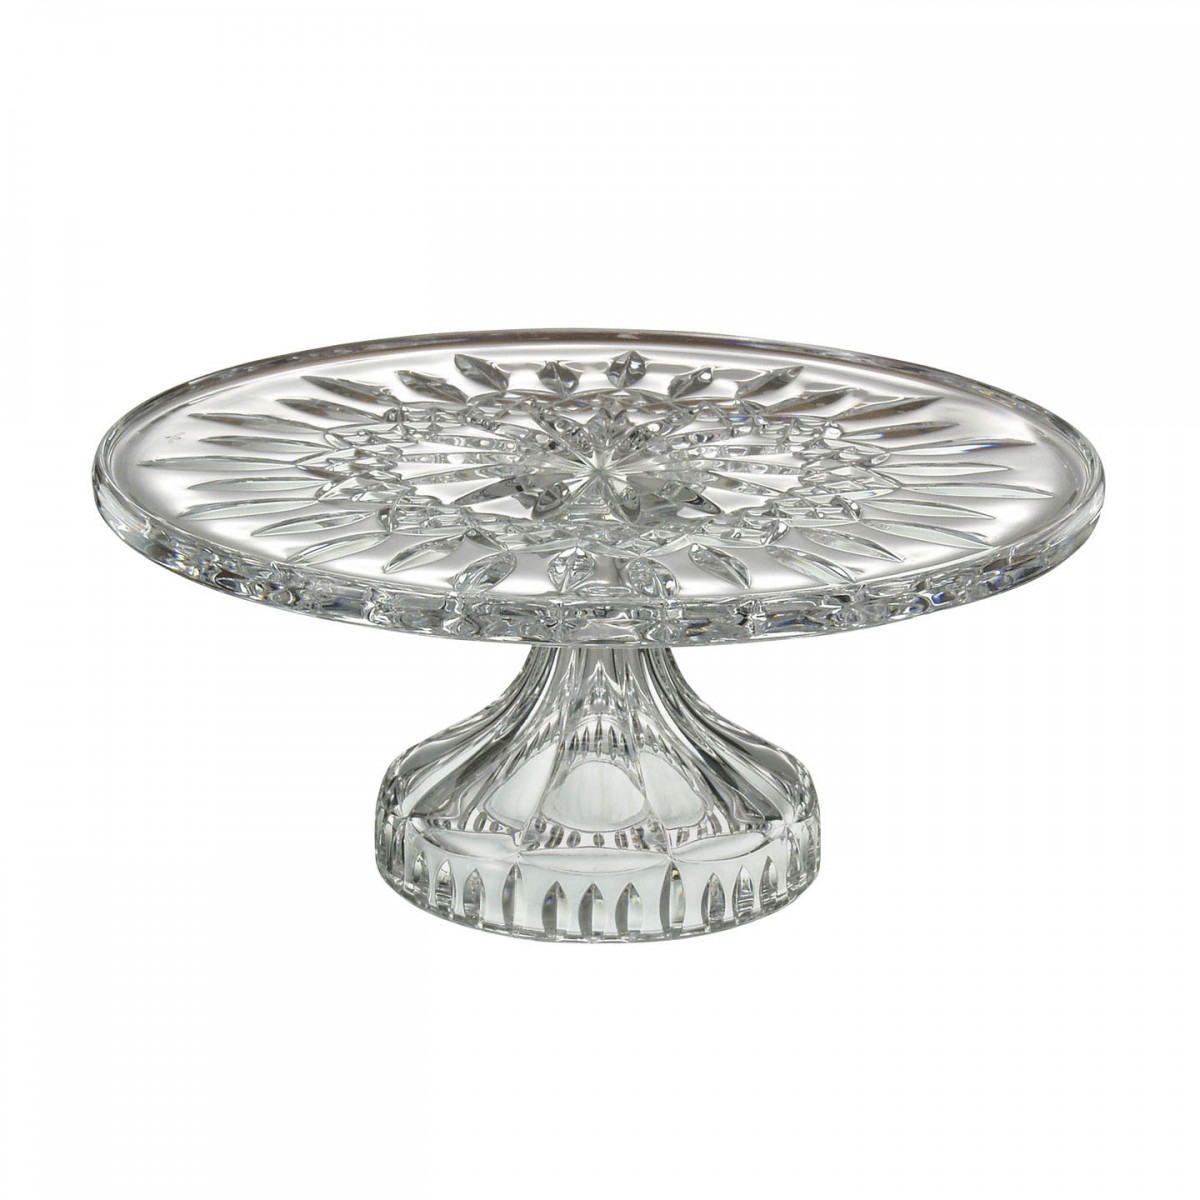 waterford-lismore-footed-cake-stand-091571124080.jpg